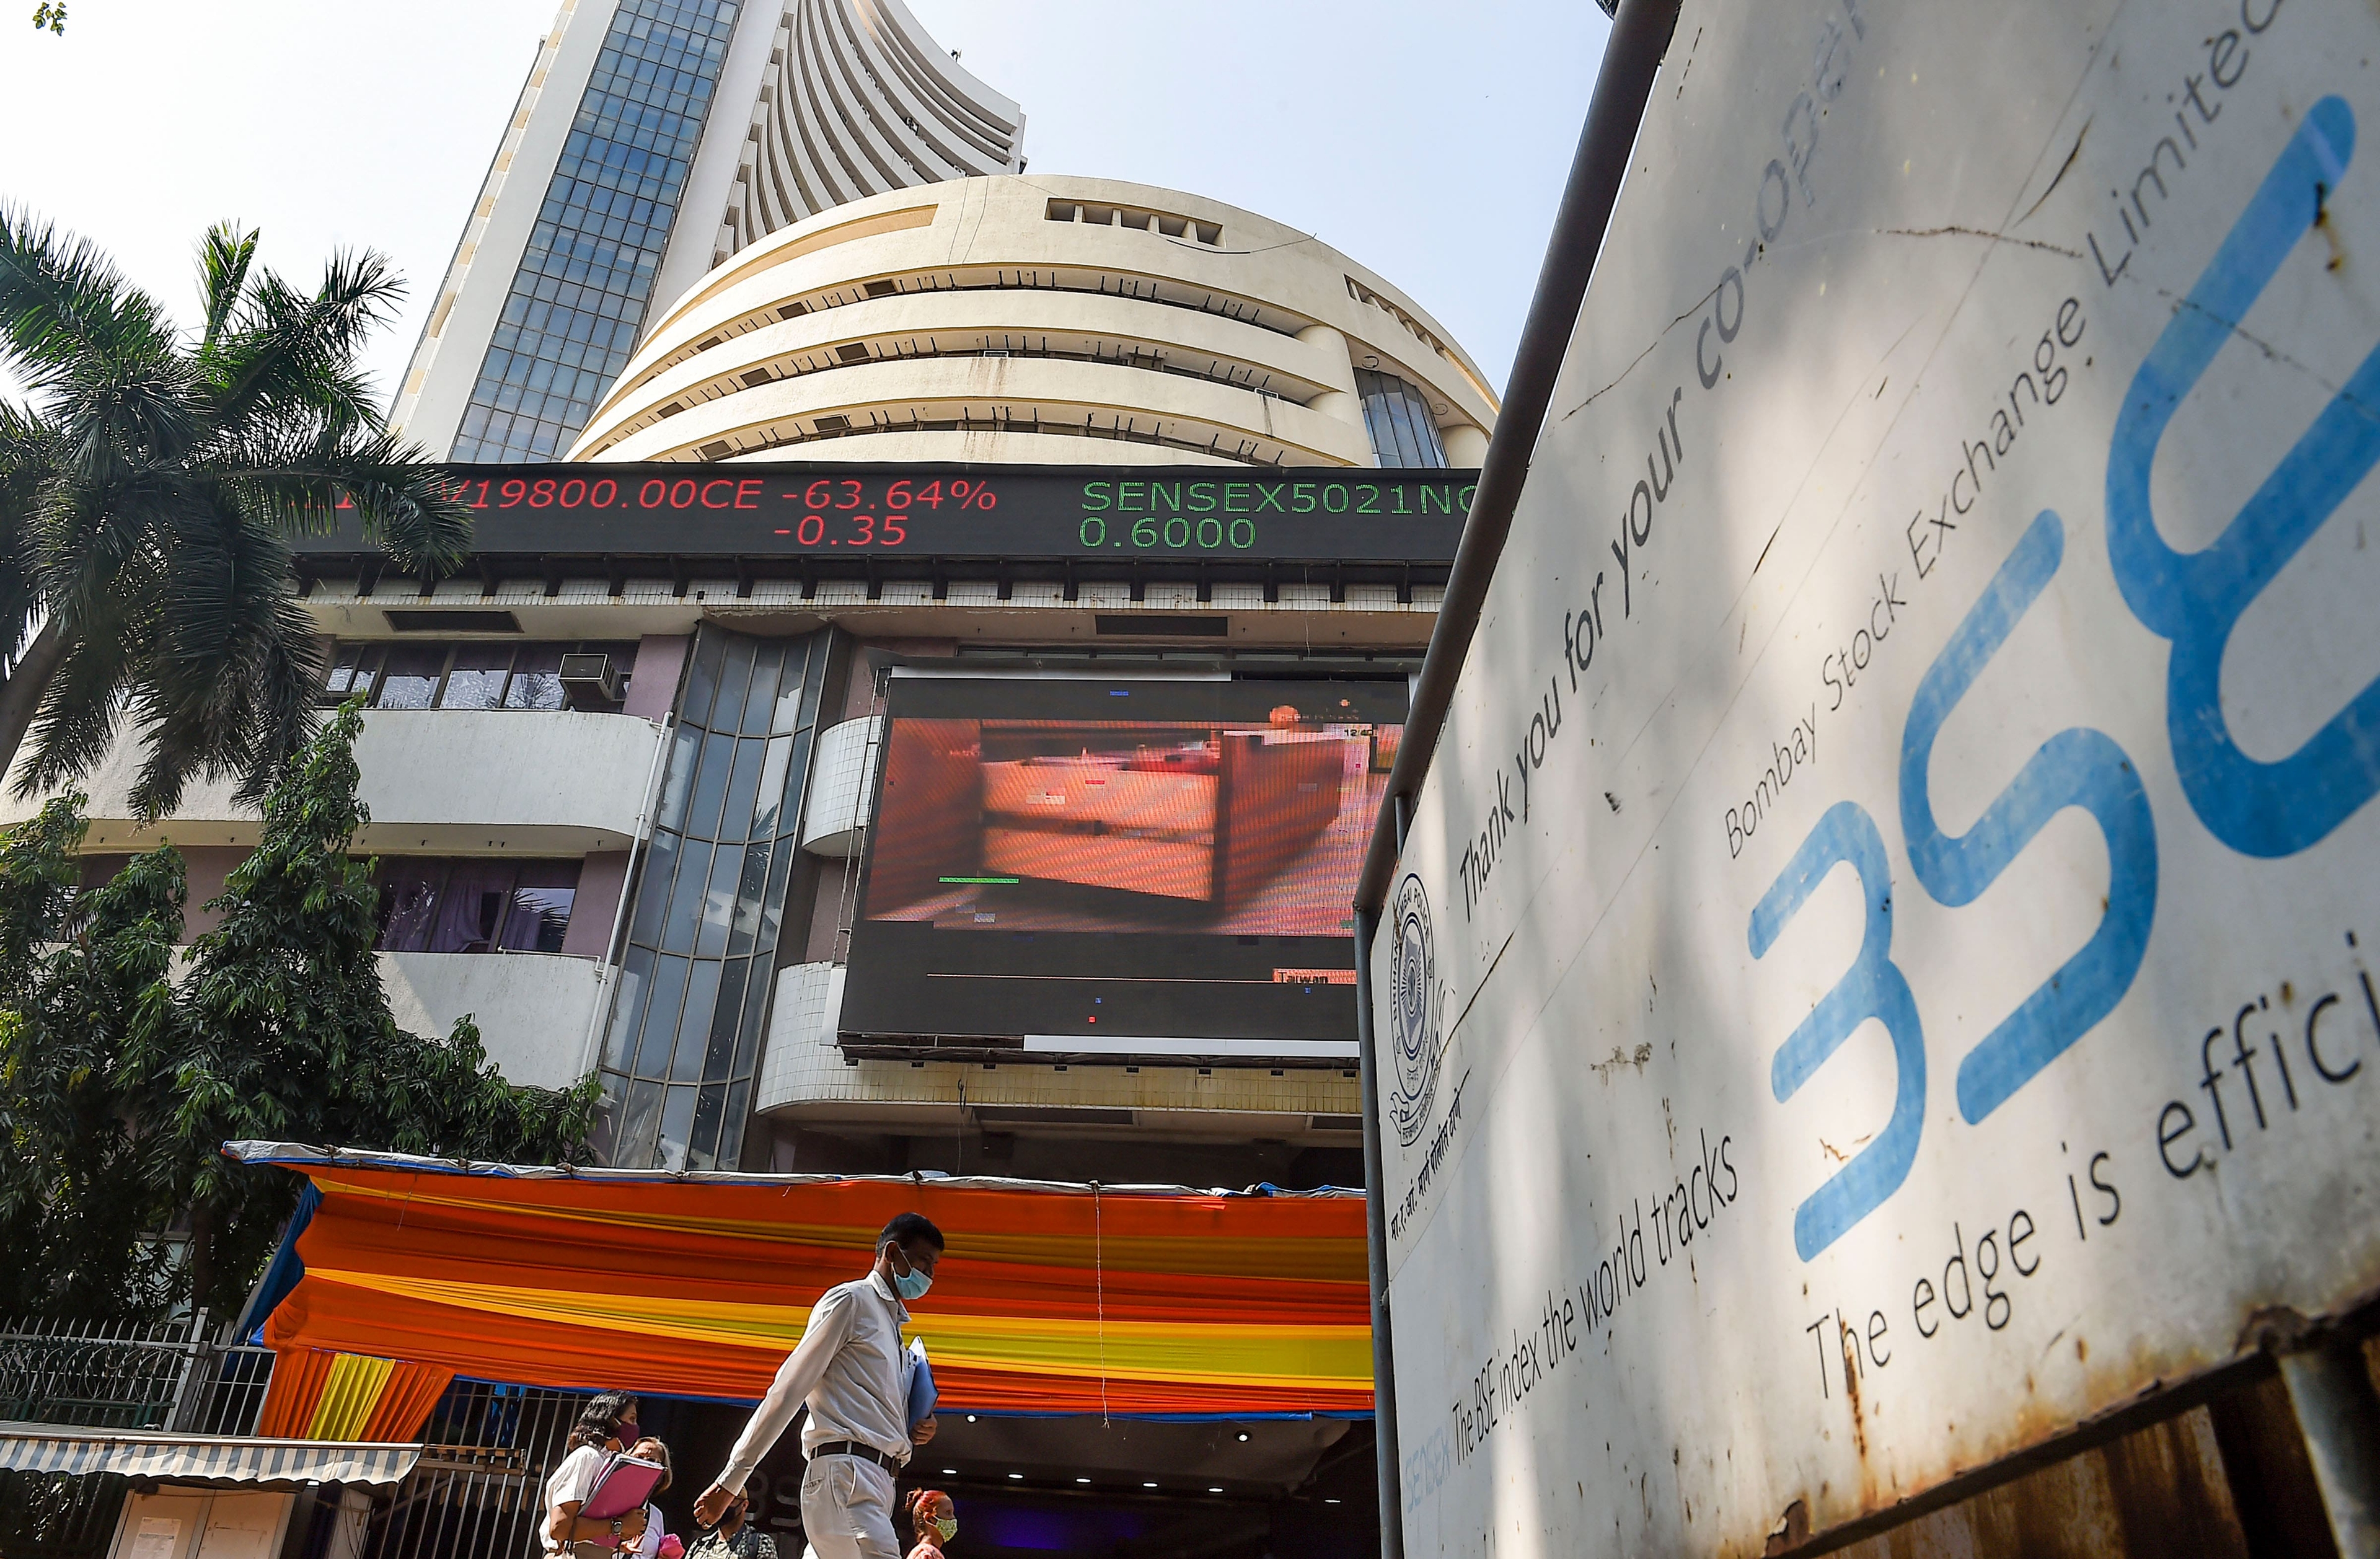 Indian markets ended in the green after four consecutive sessions of losses on March 8. Investors lapped up shares of the recently beaten-down sectors such as IT, pharma, realty and FMCG owing to some comfort on the valuation front. Sensex ended the day 581 points, or 1.10 percent, higher at 53,424.09 while the Nifty finished 150 points, or 0.95 percent, higher at 16,013.45.